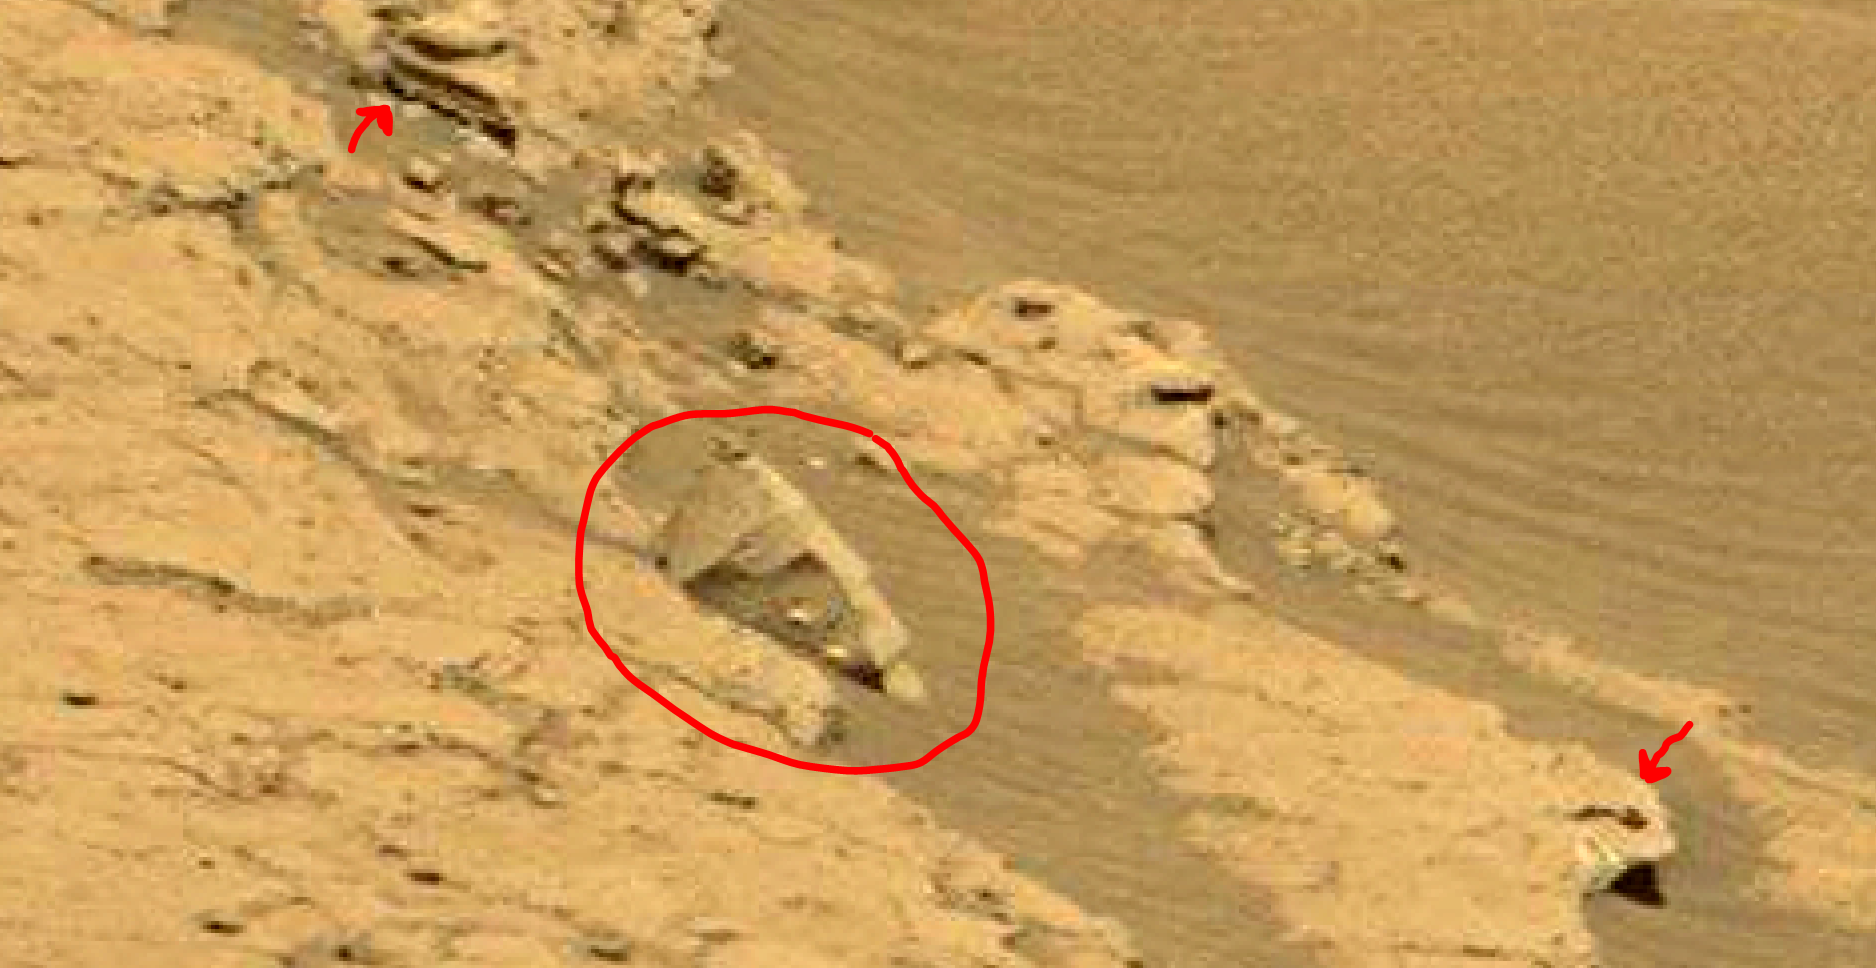 mars sol 1353 anomaly-artifacts 45 was life on mars